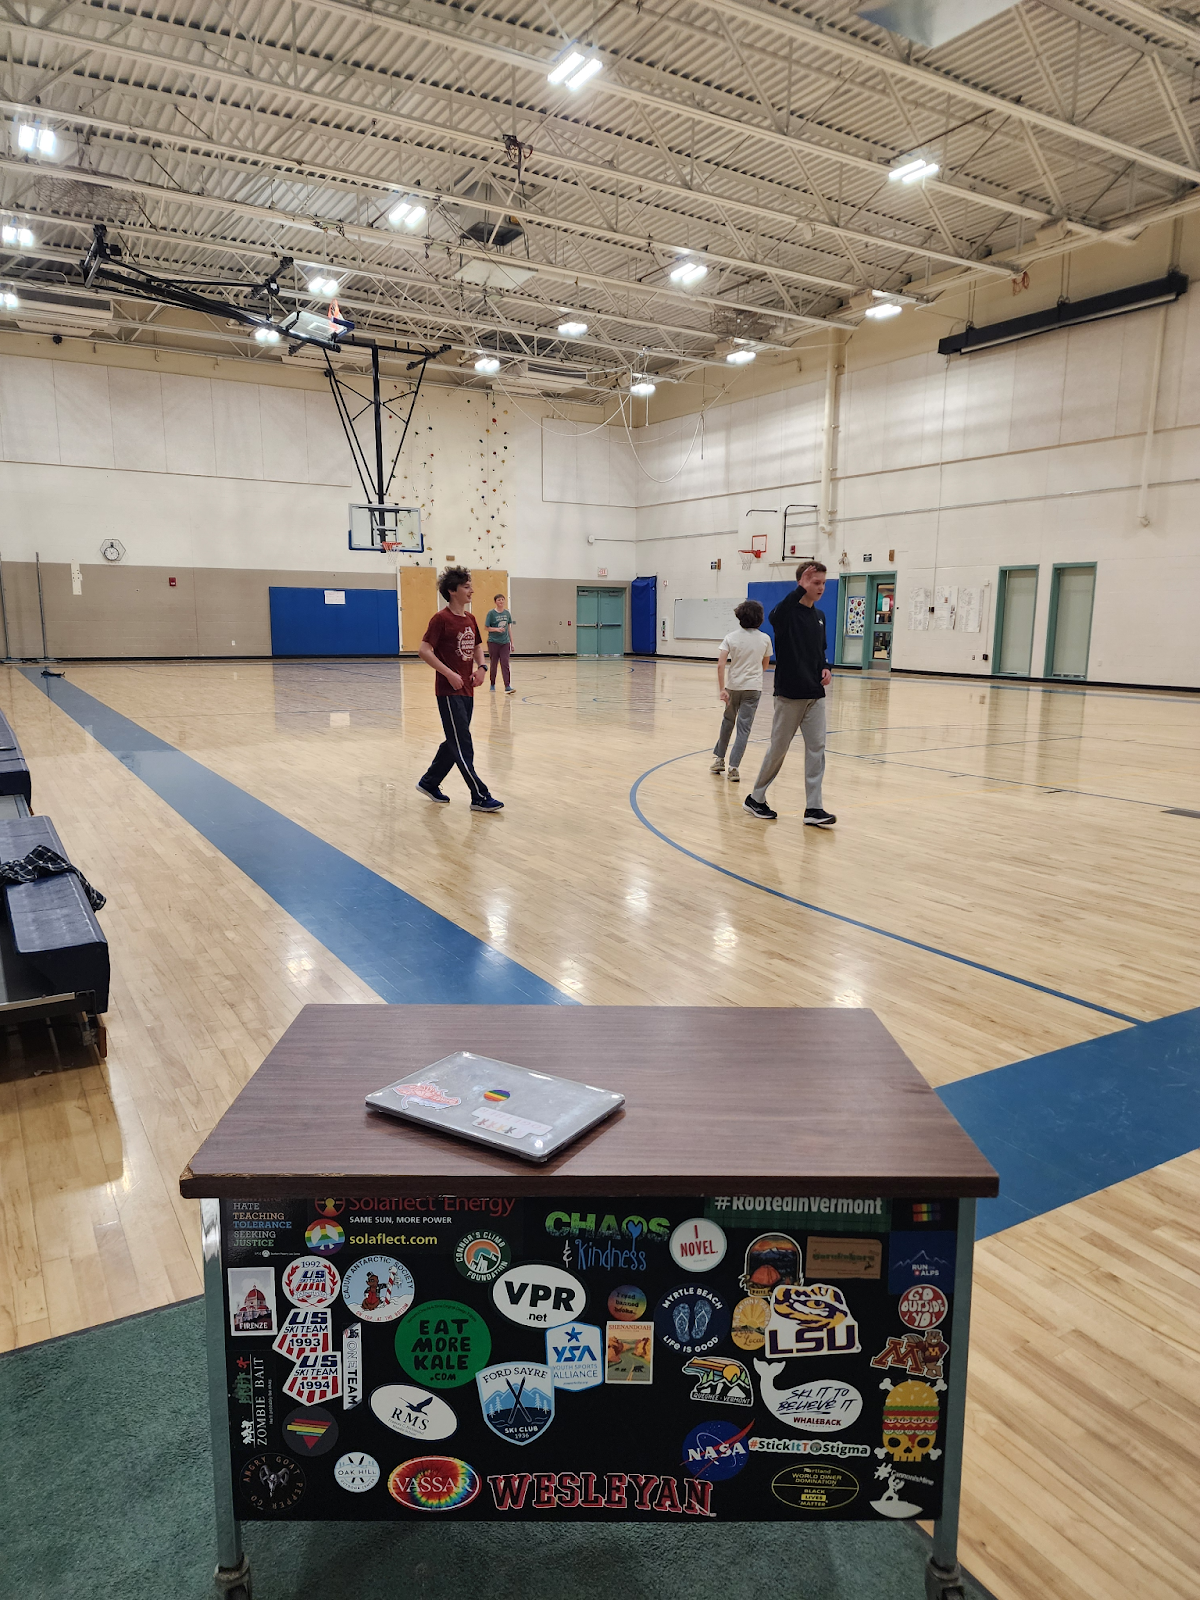 students in the gym, with the rolling desk in the foreground